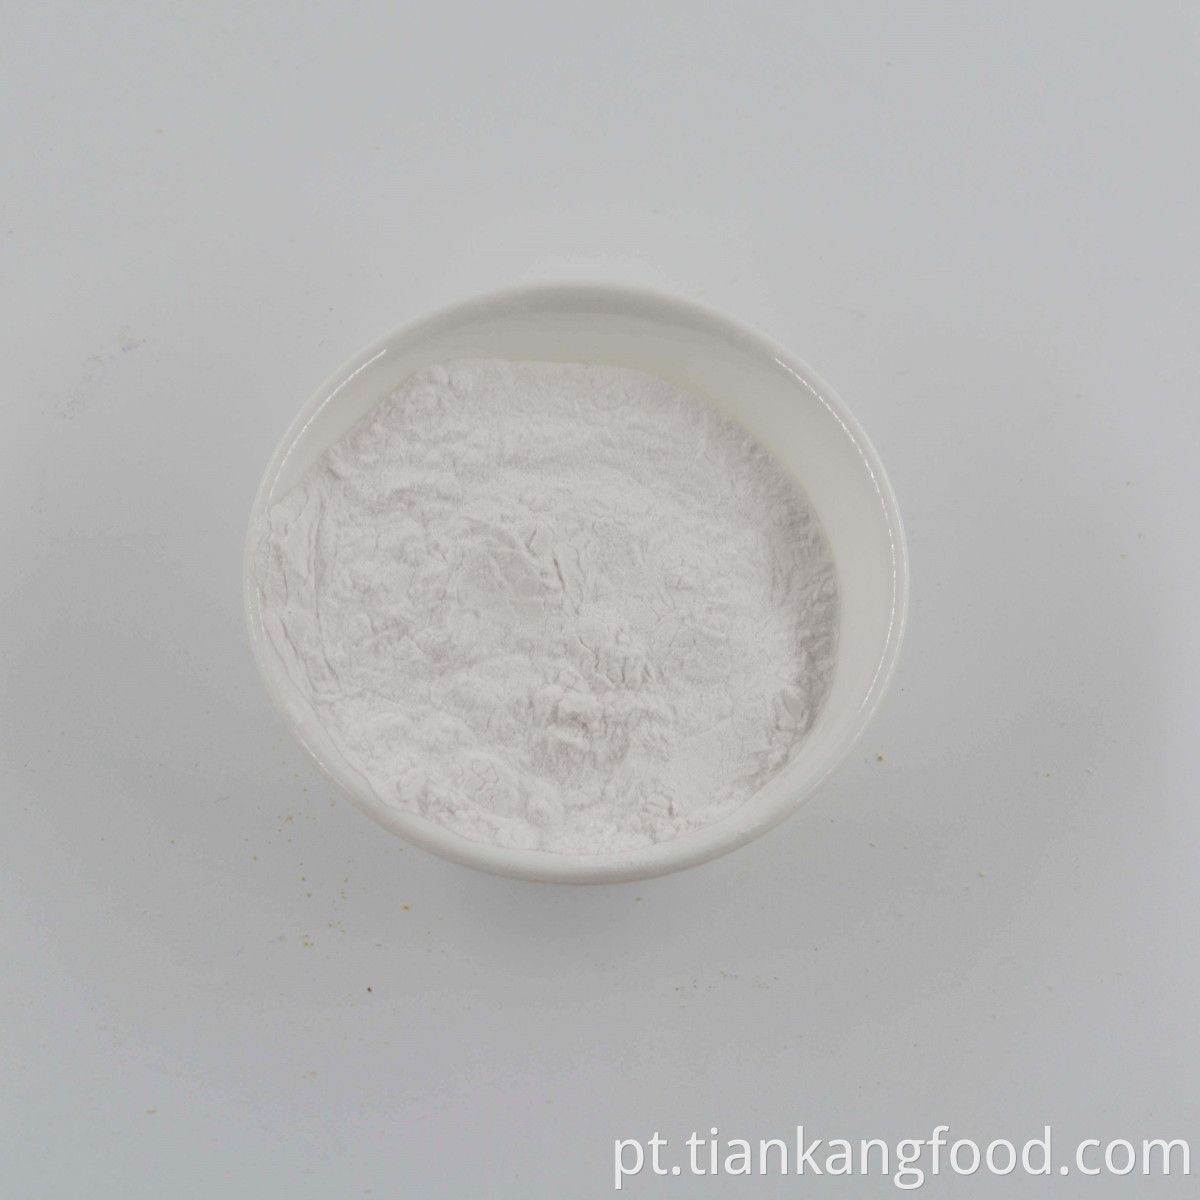 Dehydrated lotus root powder